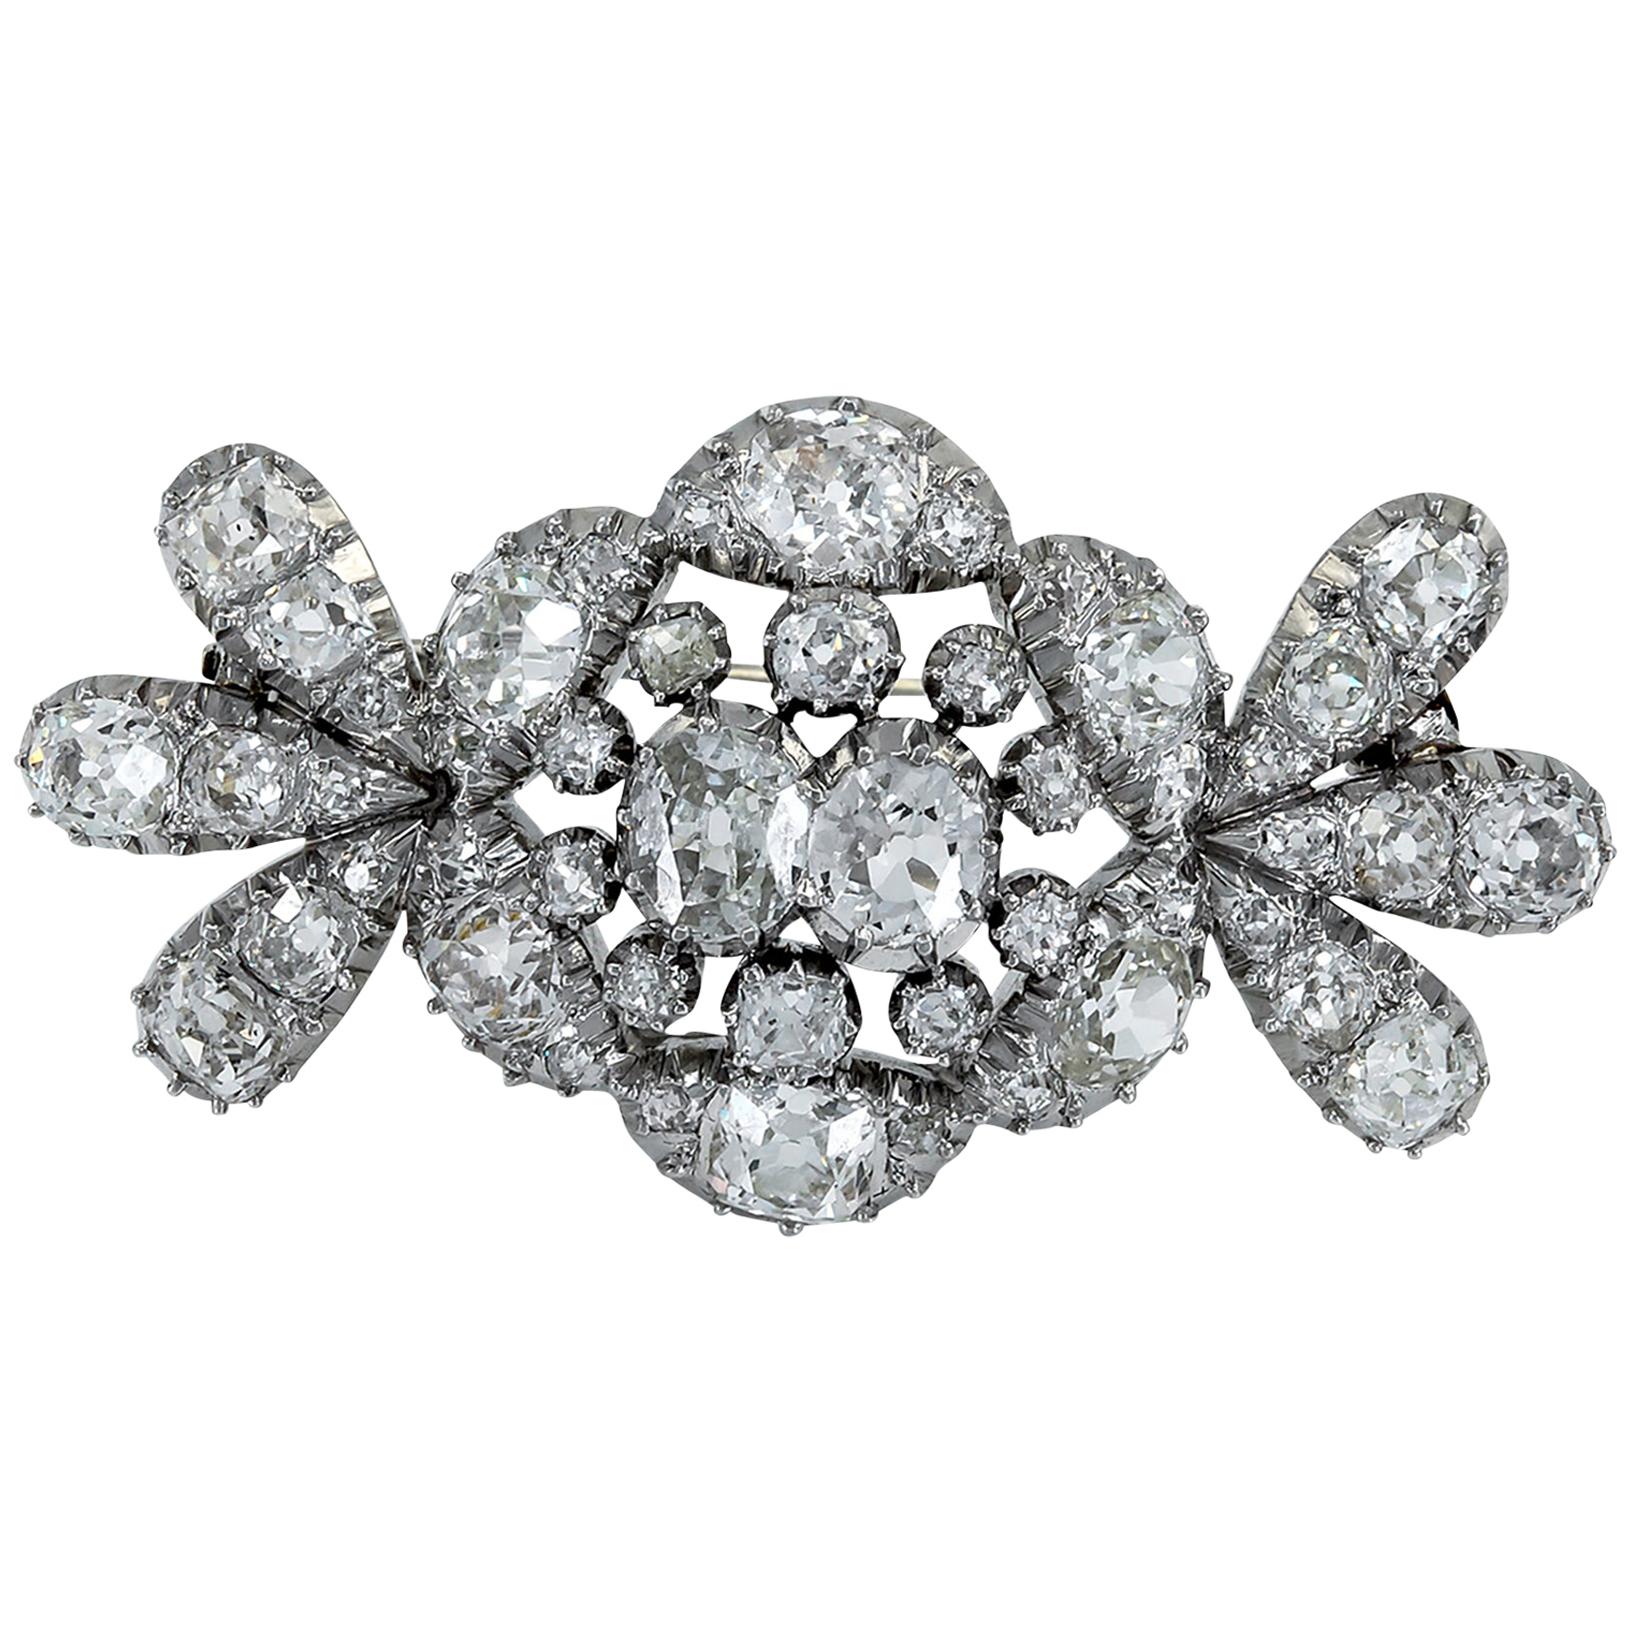 Antique Diamond and Platinum Brooch by Cartier 